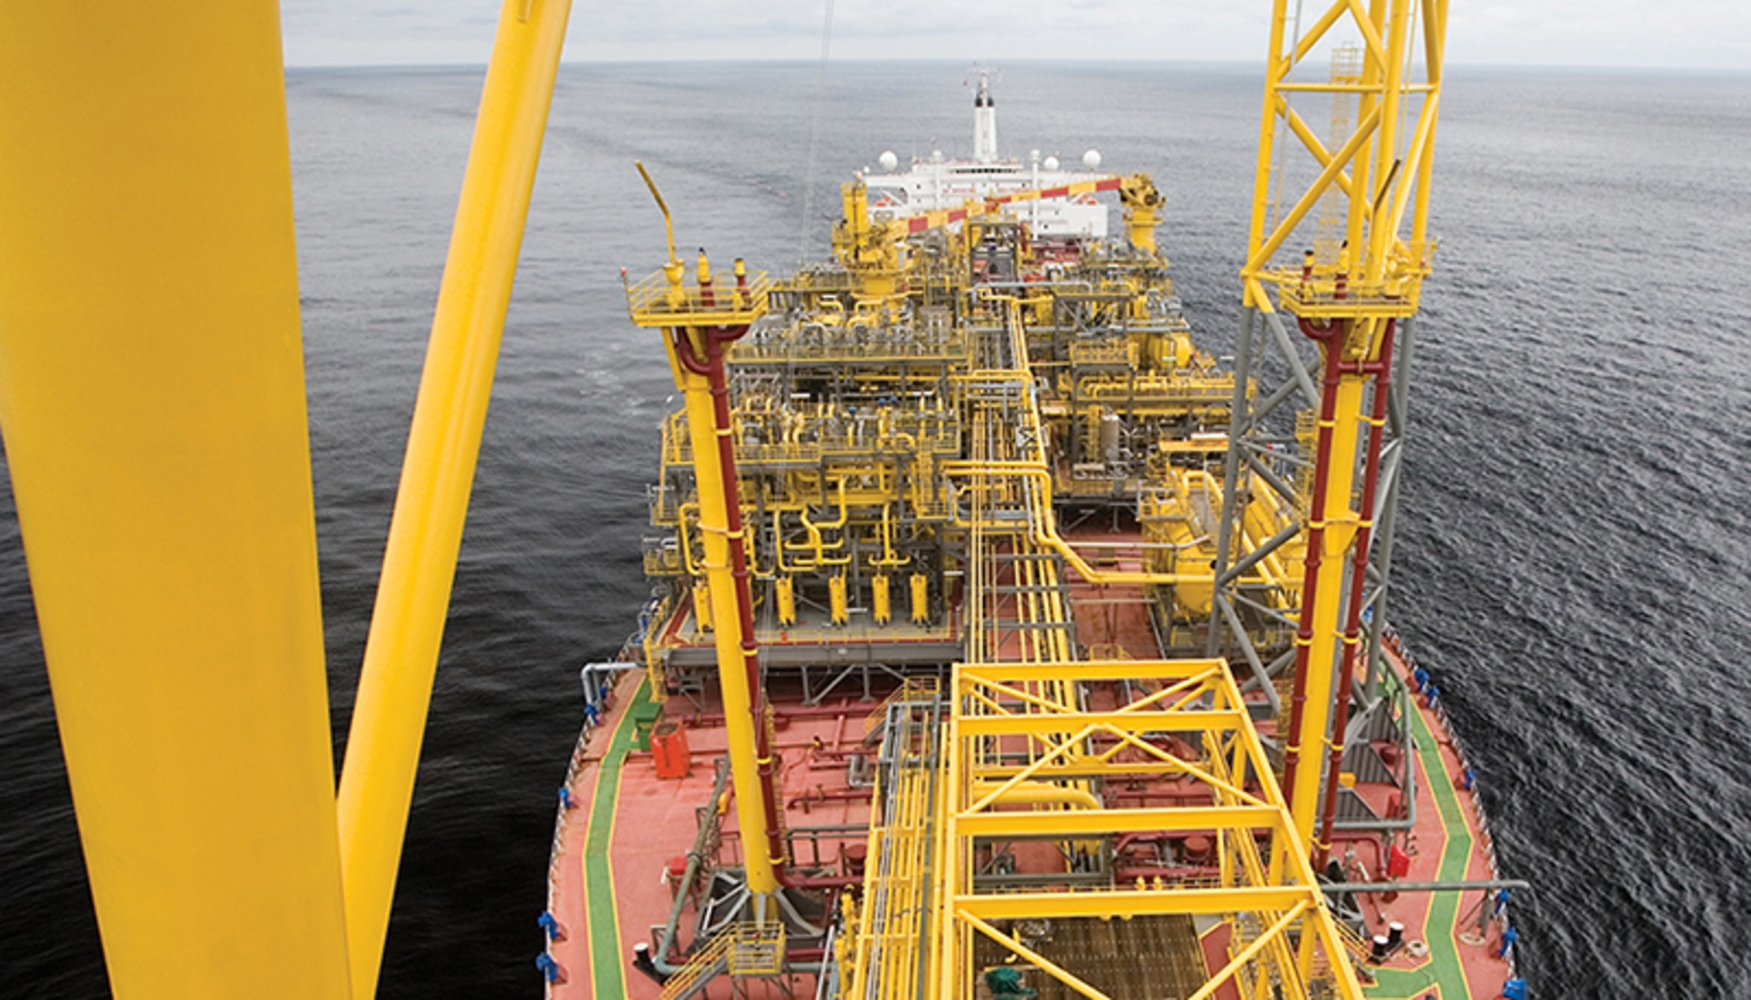 The oil companies' quiet retreat from the Gulf of Guinea